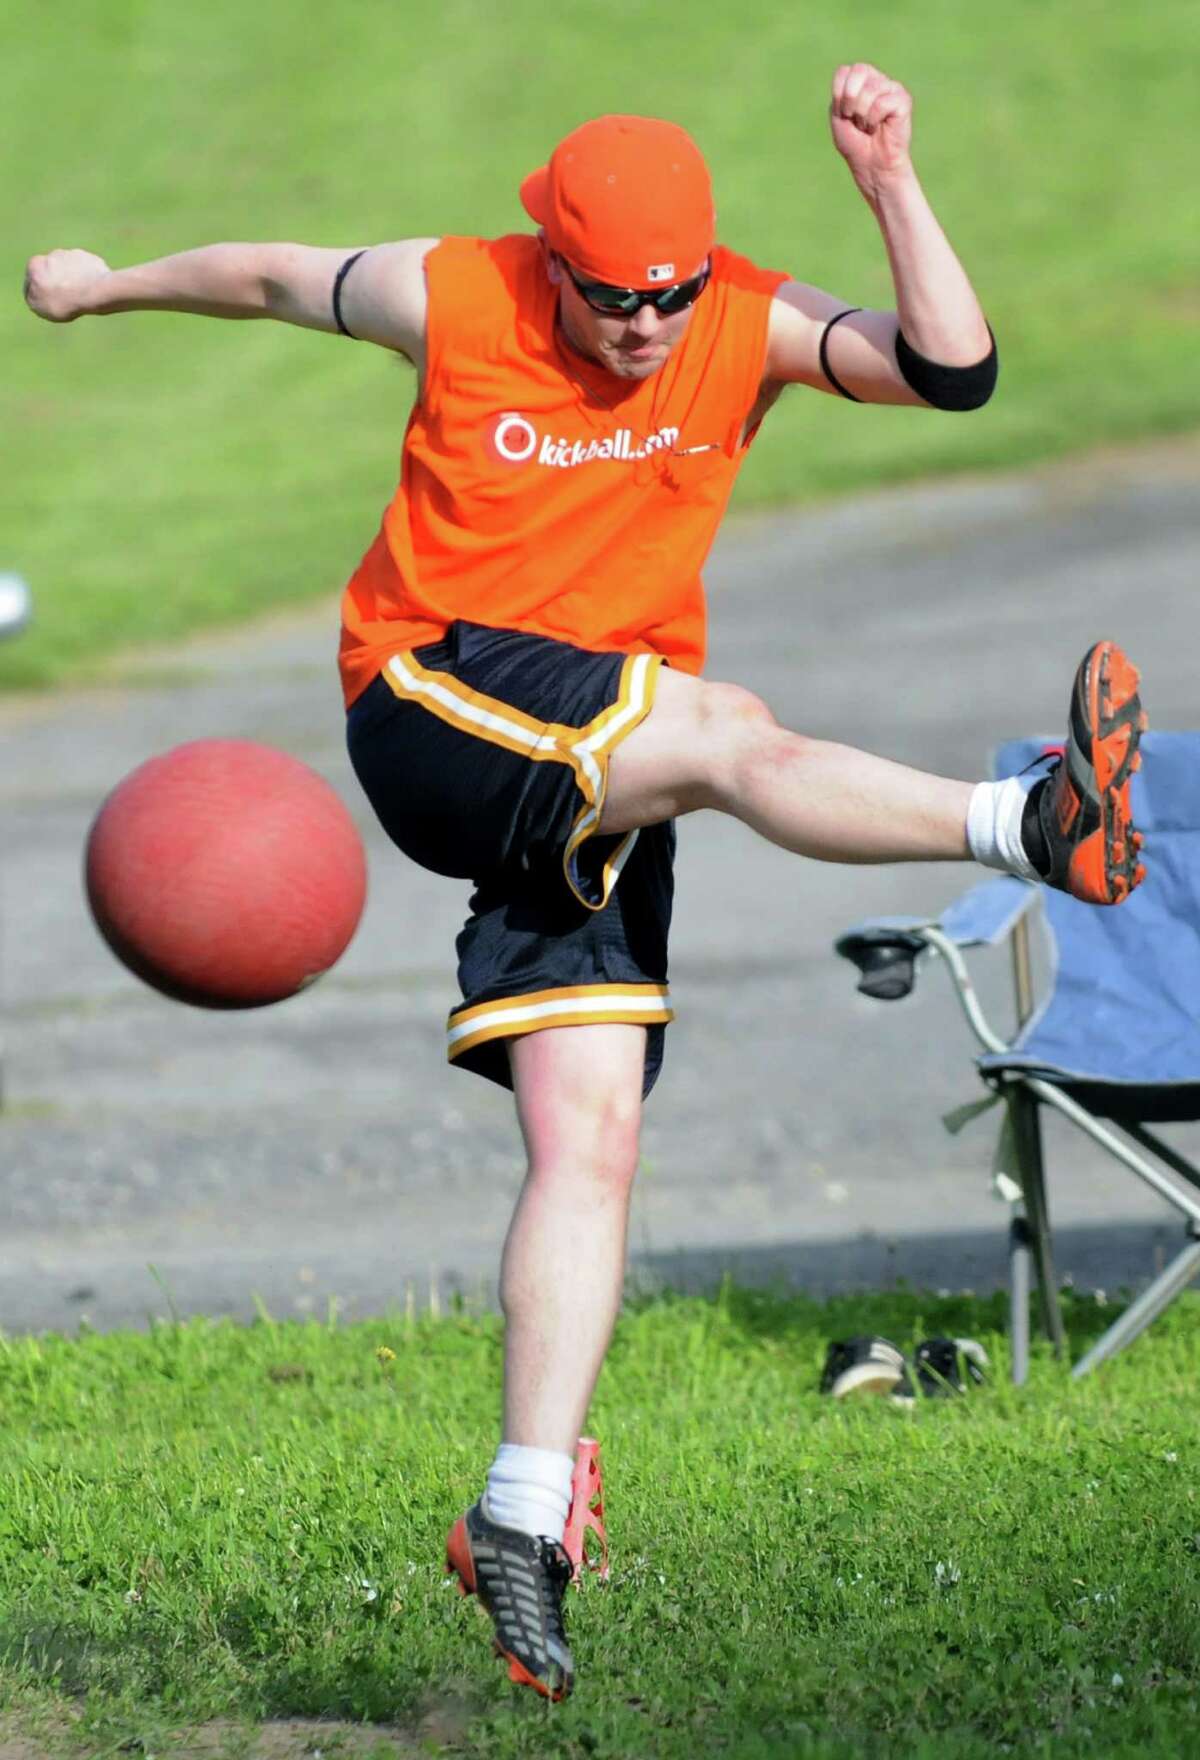 Nick Quaglieri kicks for the Just for Kicks team during a kickball game on Thursday, May 29, 2014, at Hackett Ball Fields in Albany, N.Y. (Cindy Schultz / Times Union)